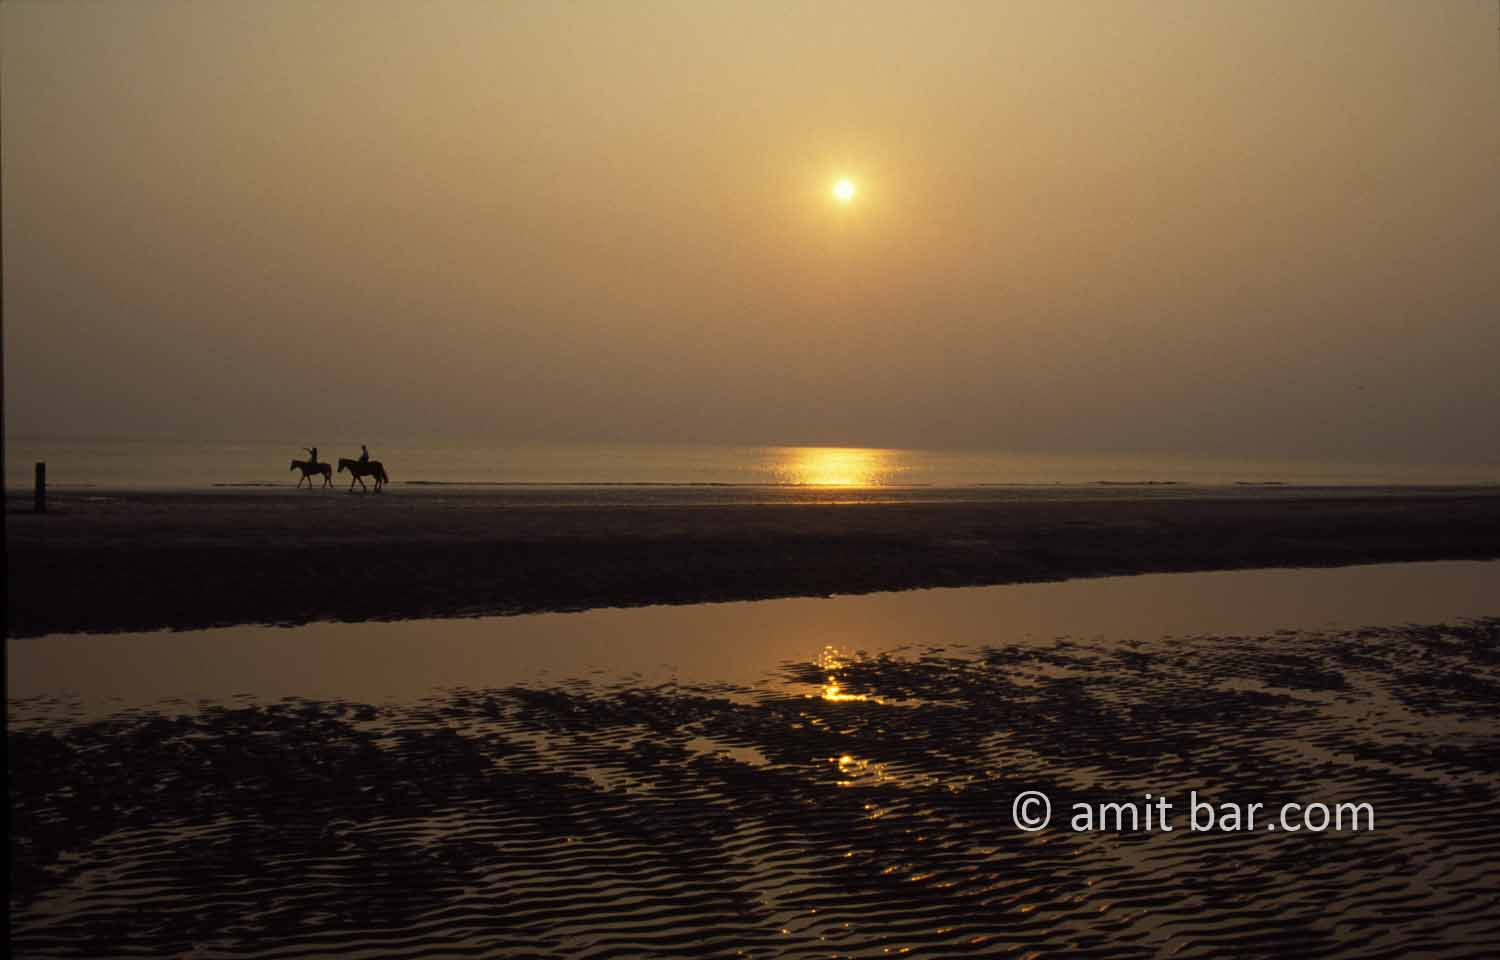 Horses at sunset II: Horses ride by the sea at sunet in Zeeland, The Netherlands